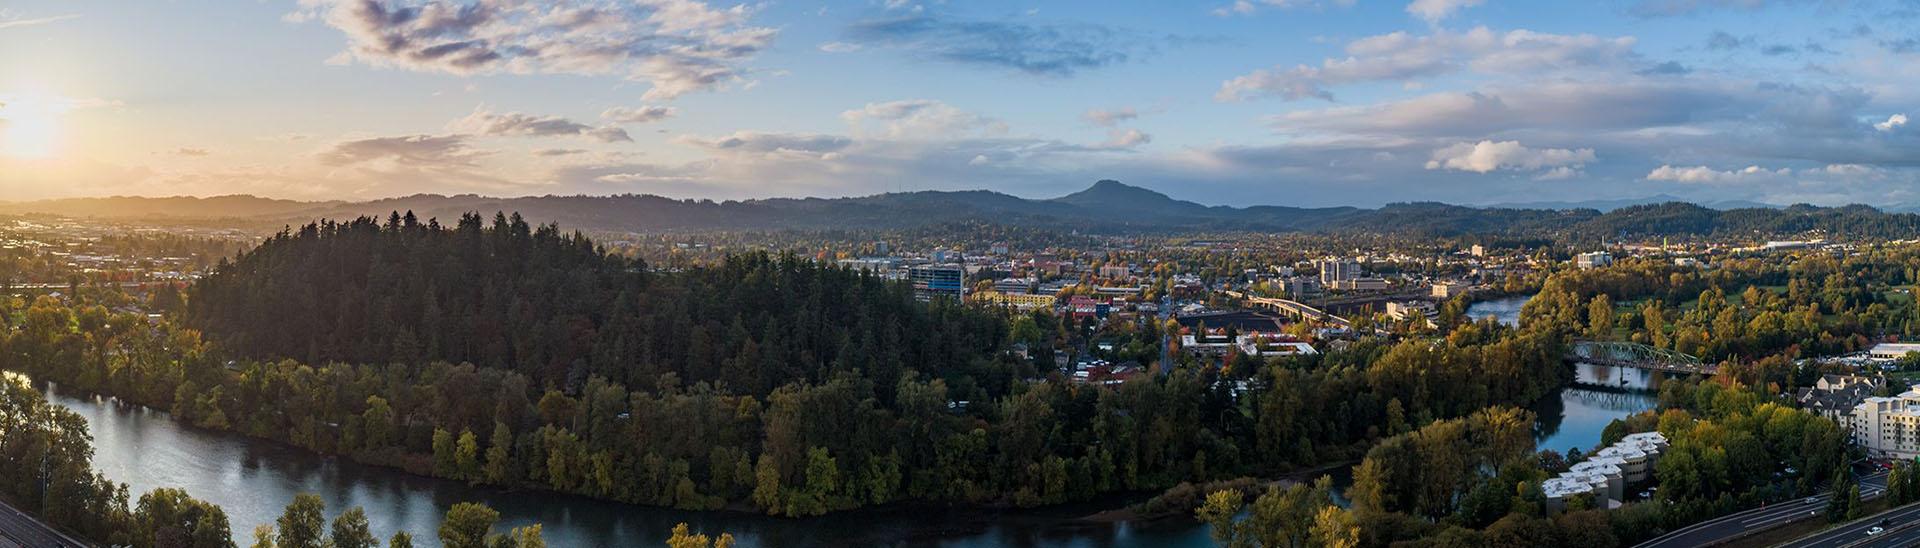 Fly To Eugene To Experience Splendid Cityscape Vacation